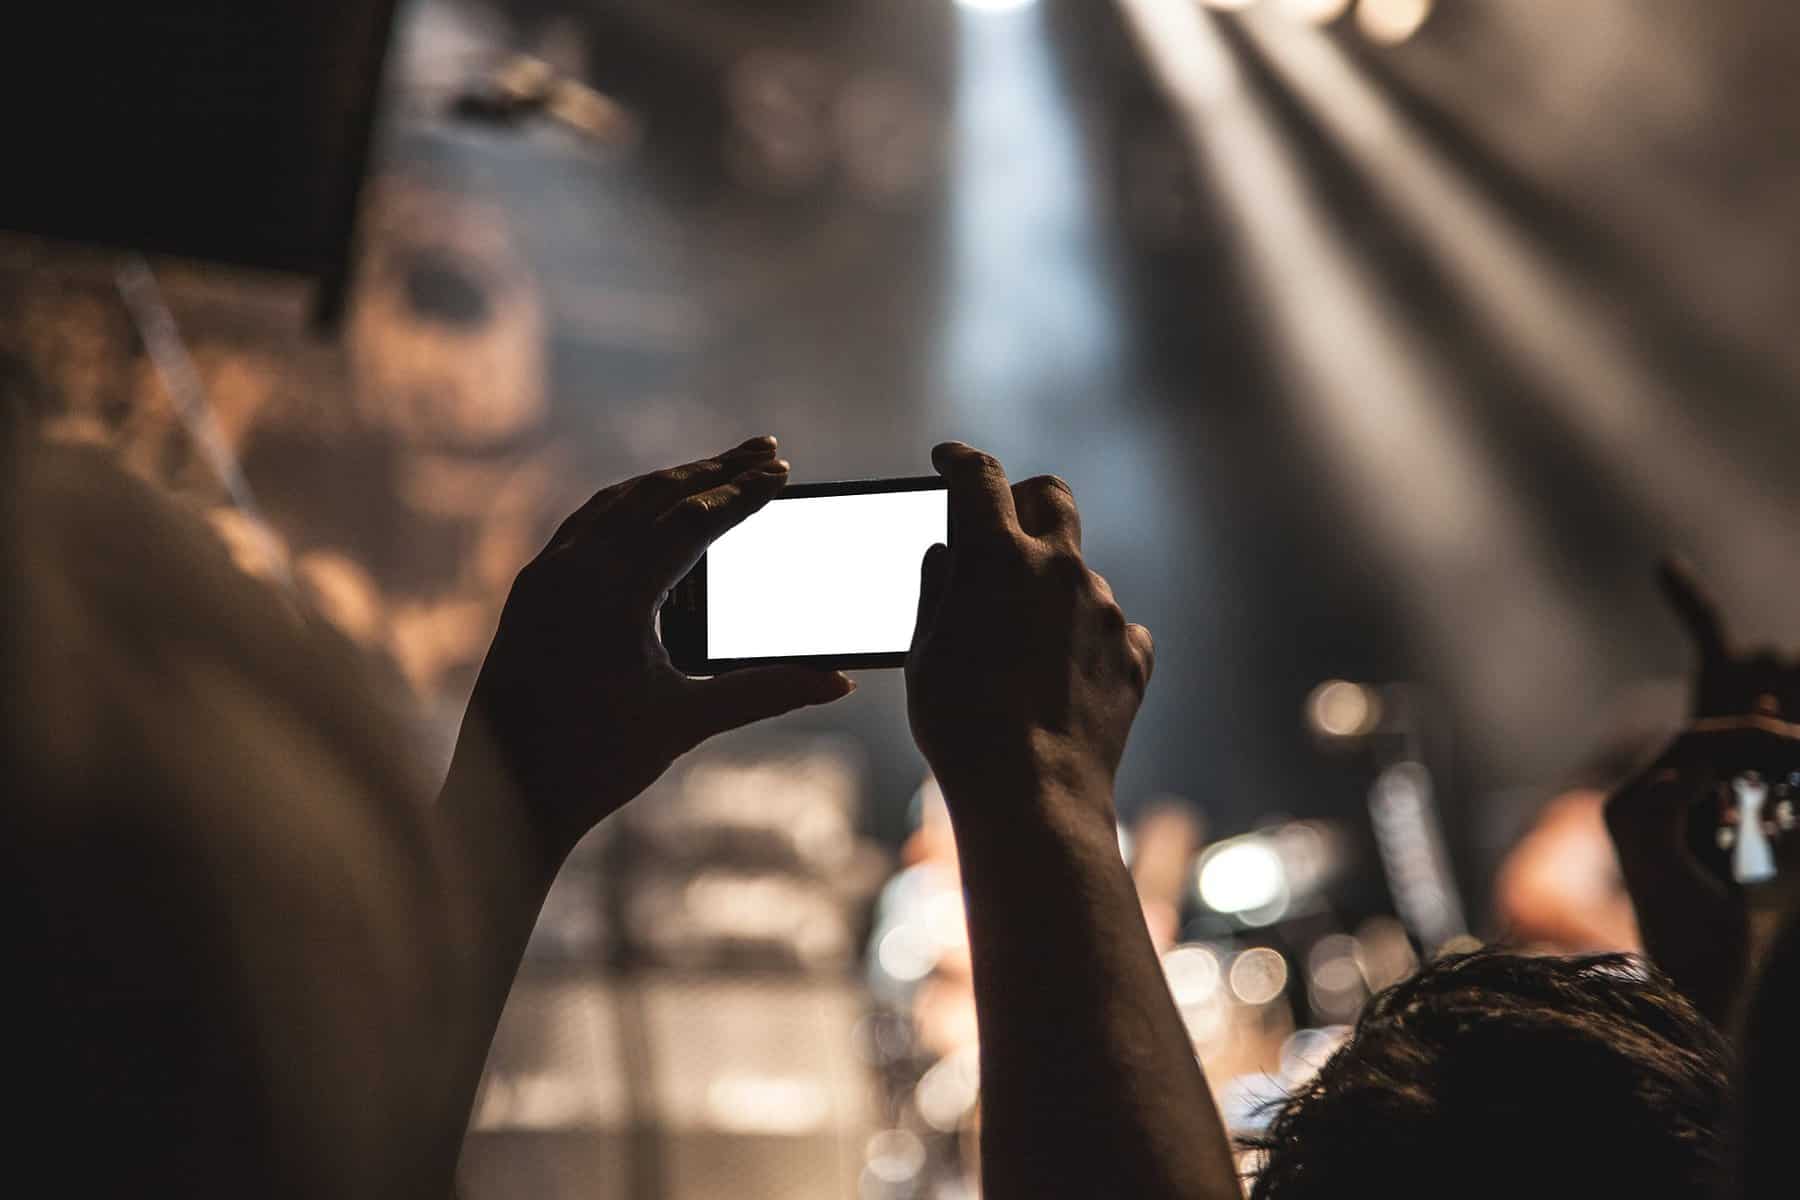 A person's hands are seen holding a cell phone recording a public event in an arena.